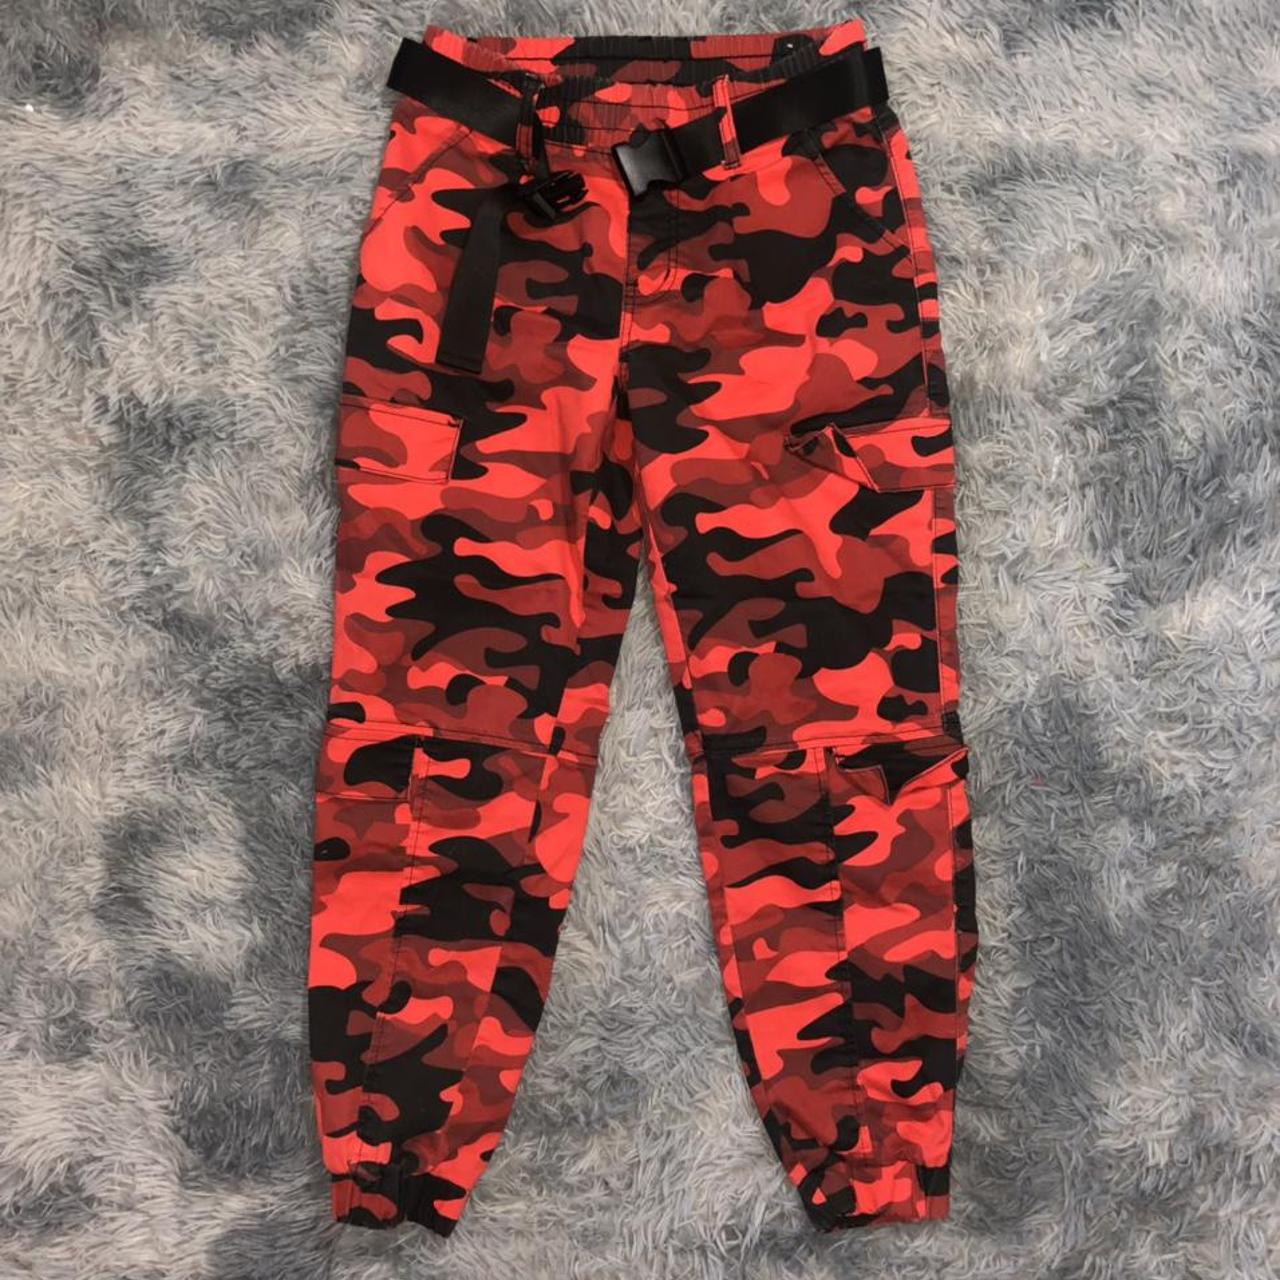 Red And Black Camo Cargo Pants Size 728 In Great Depop